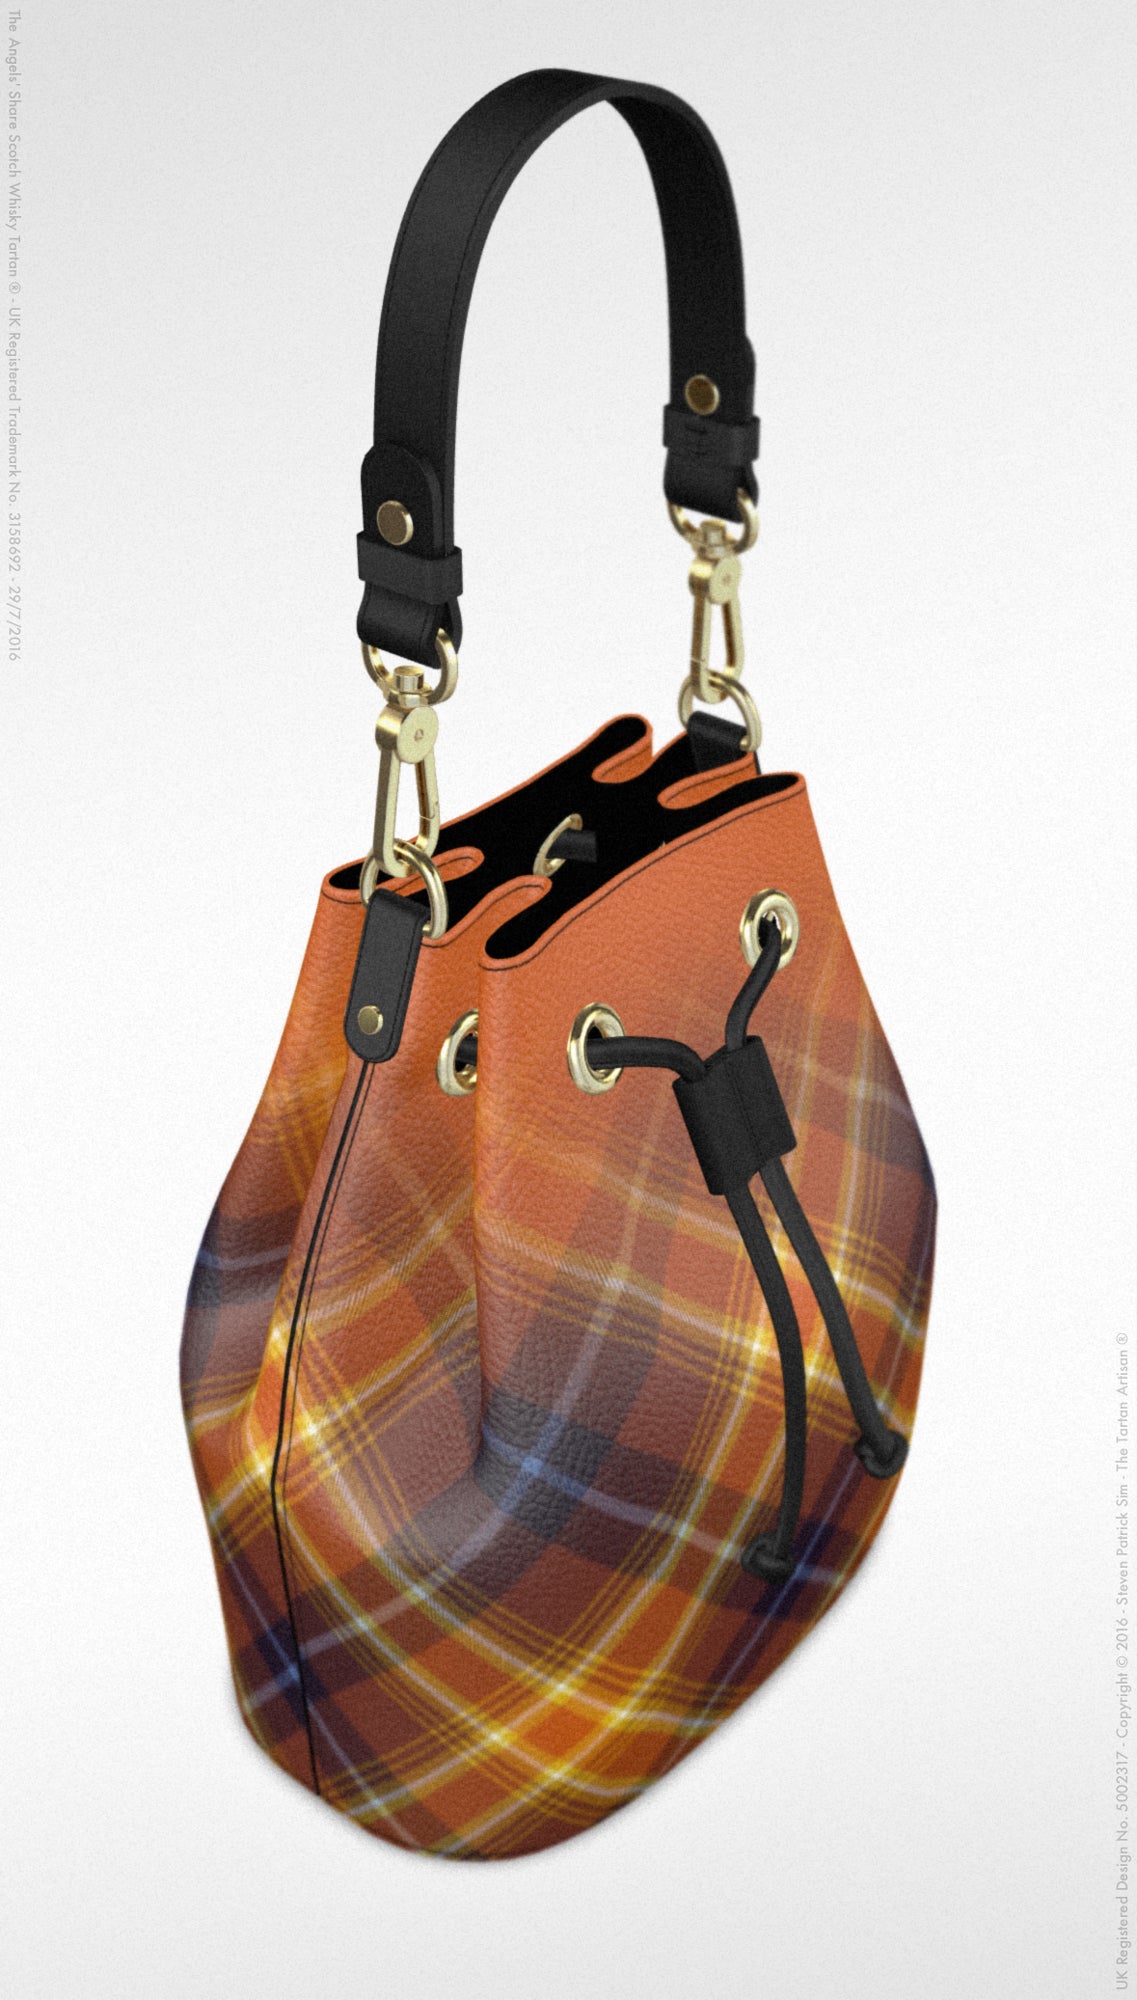 The Angels' Share - Custom Made Leather Bucket Bag - Whisky Amber